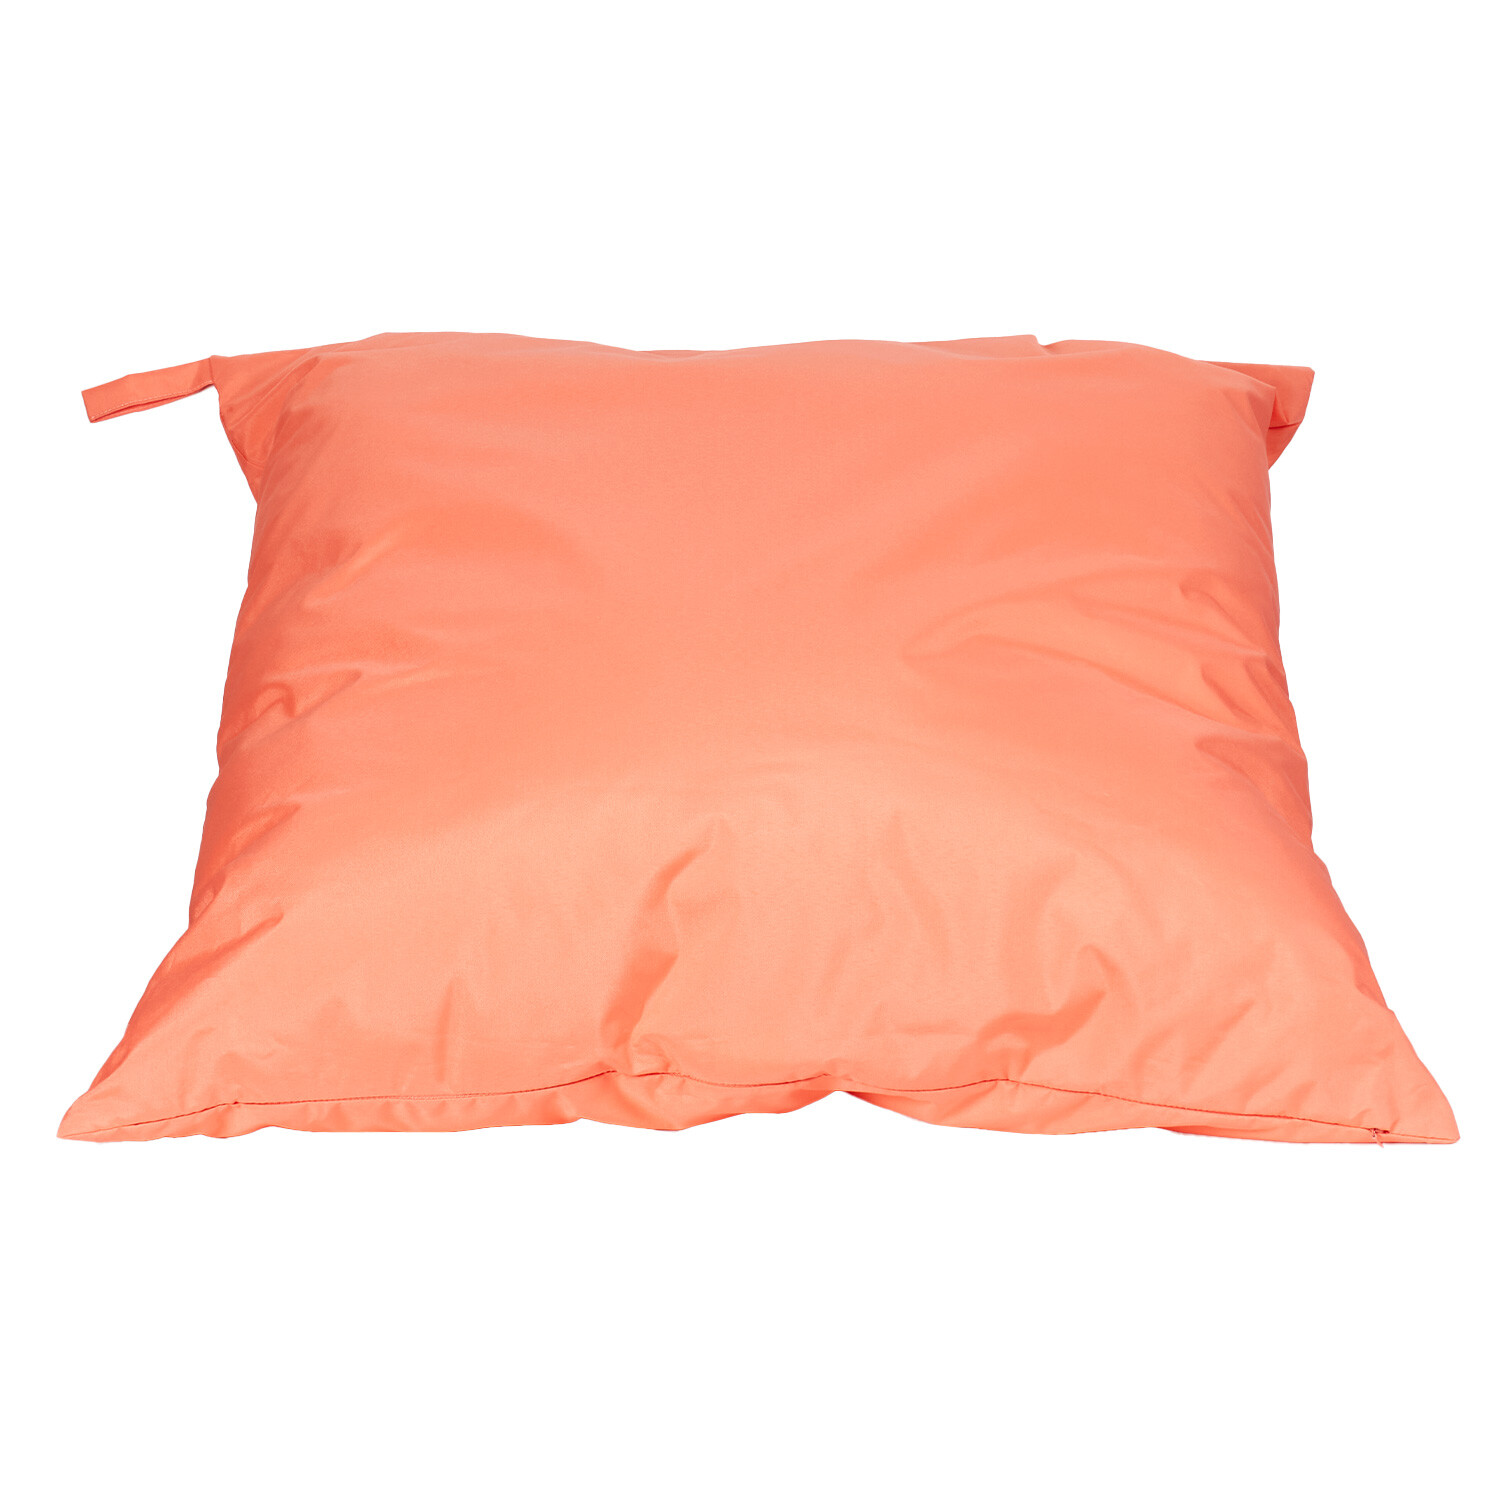 Outdoor Floor Cushion - Coral Image 2